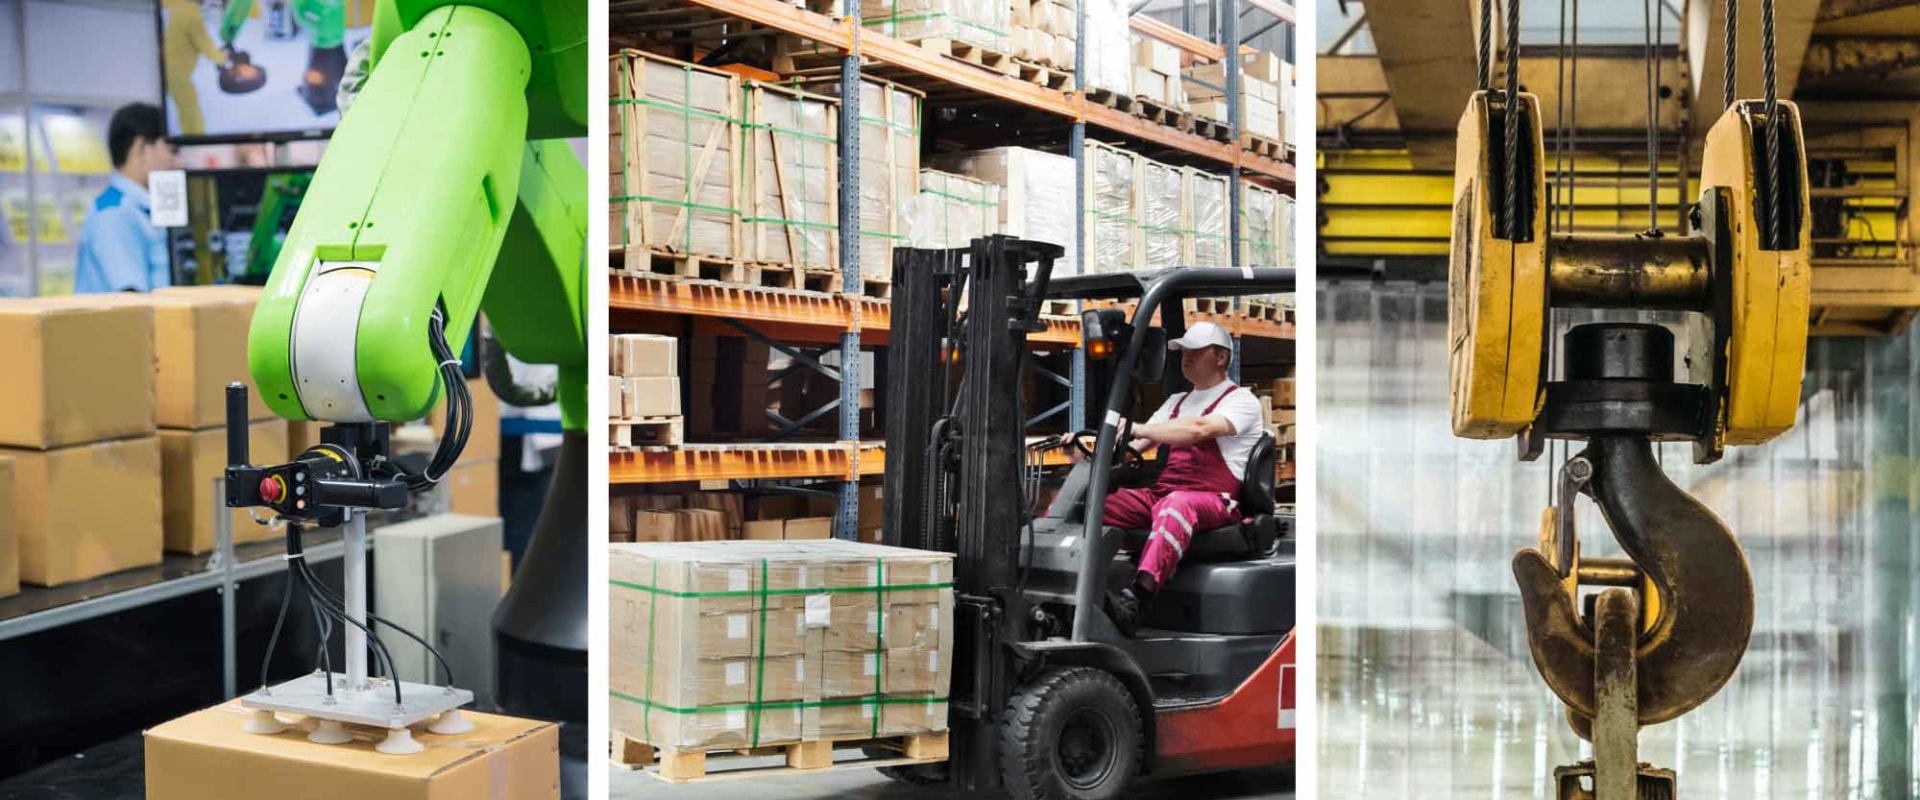 What is the importance of effective materials handling?